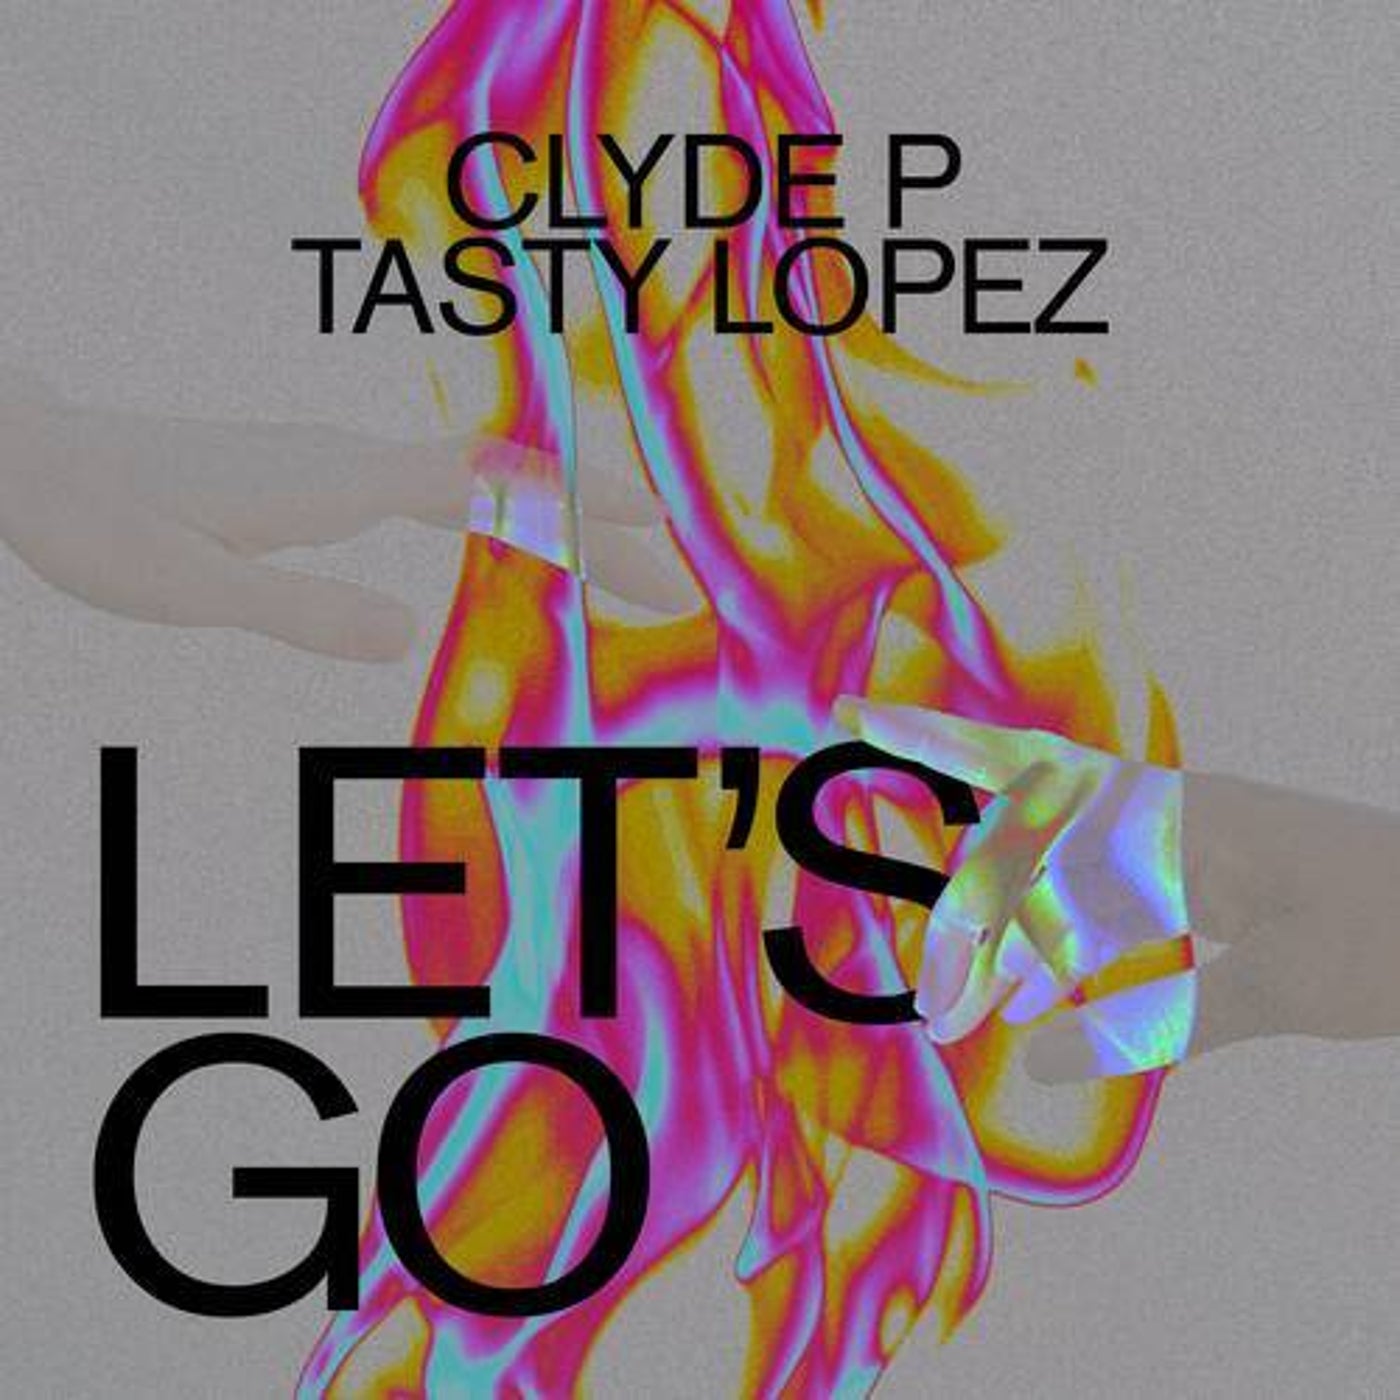 image cover: Clyde P, Tasty Lopez - Let's Go (Extended Mix) on Ultra